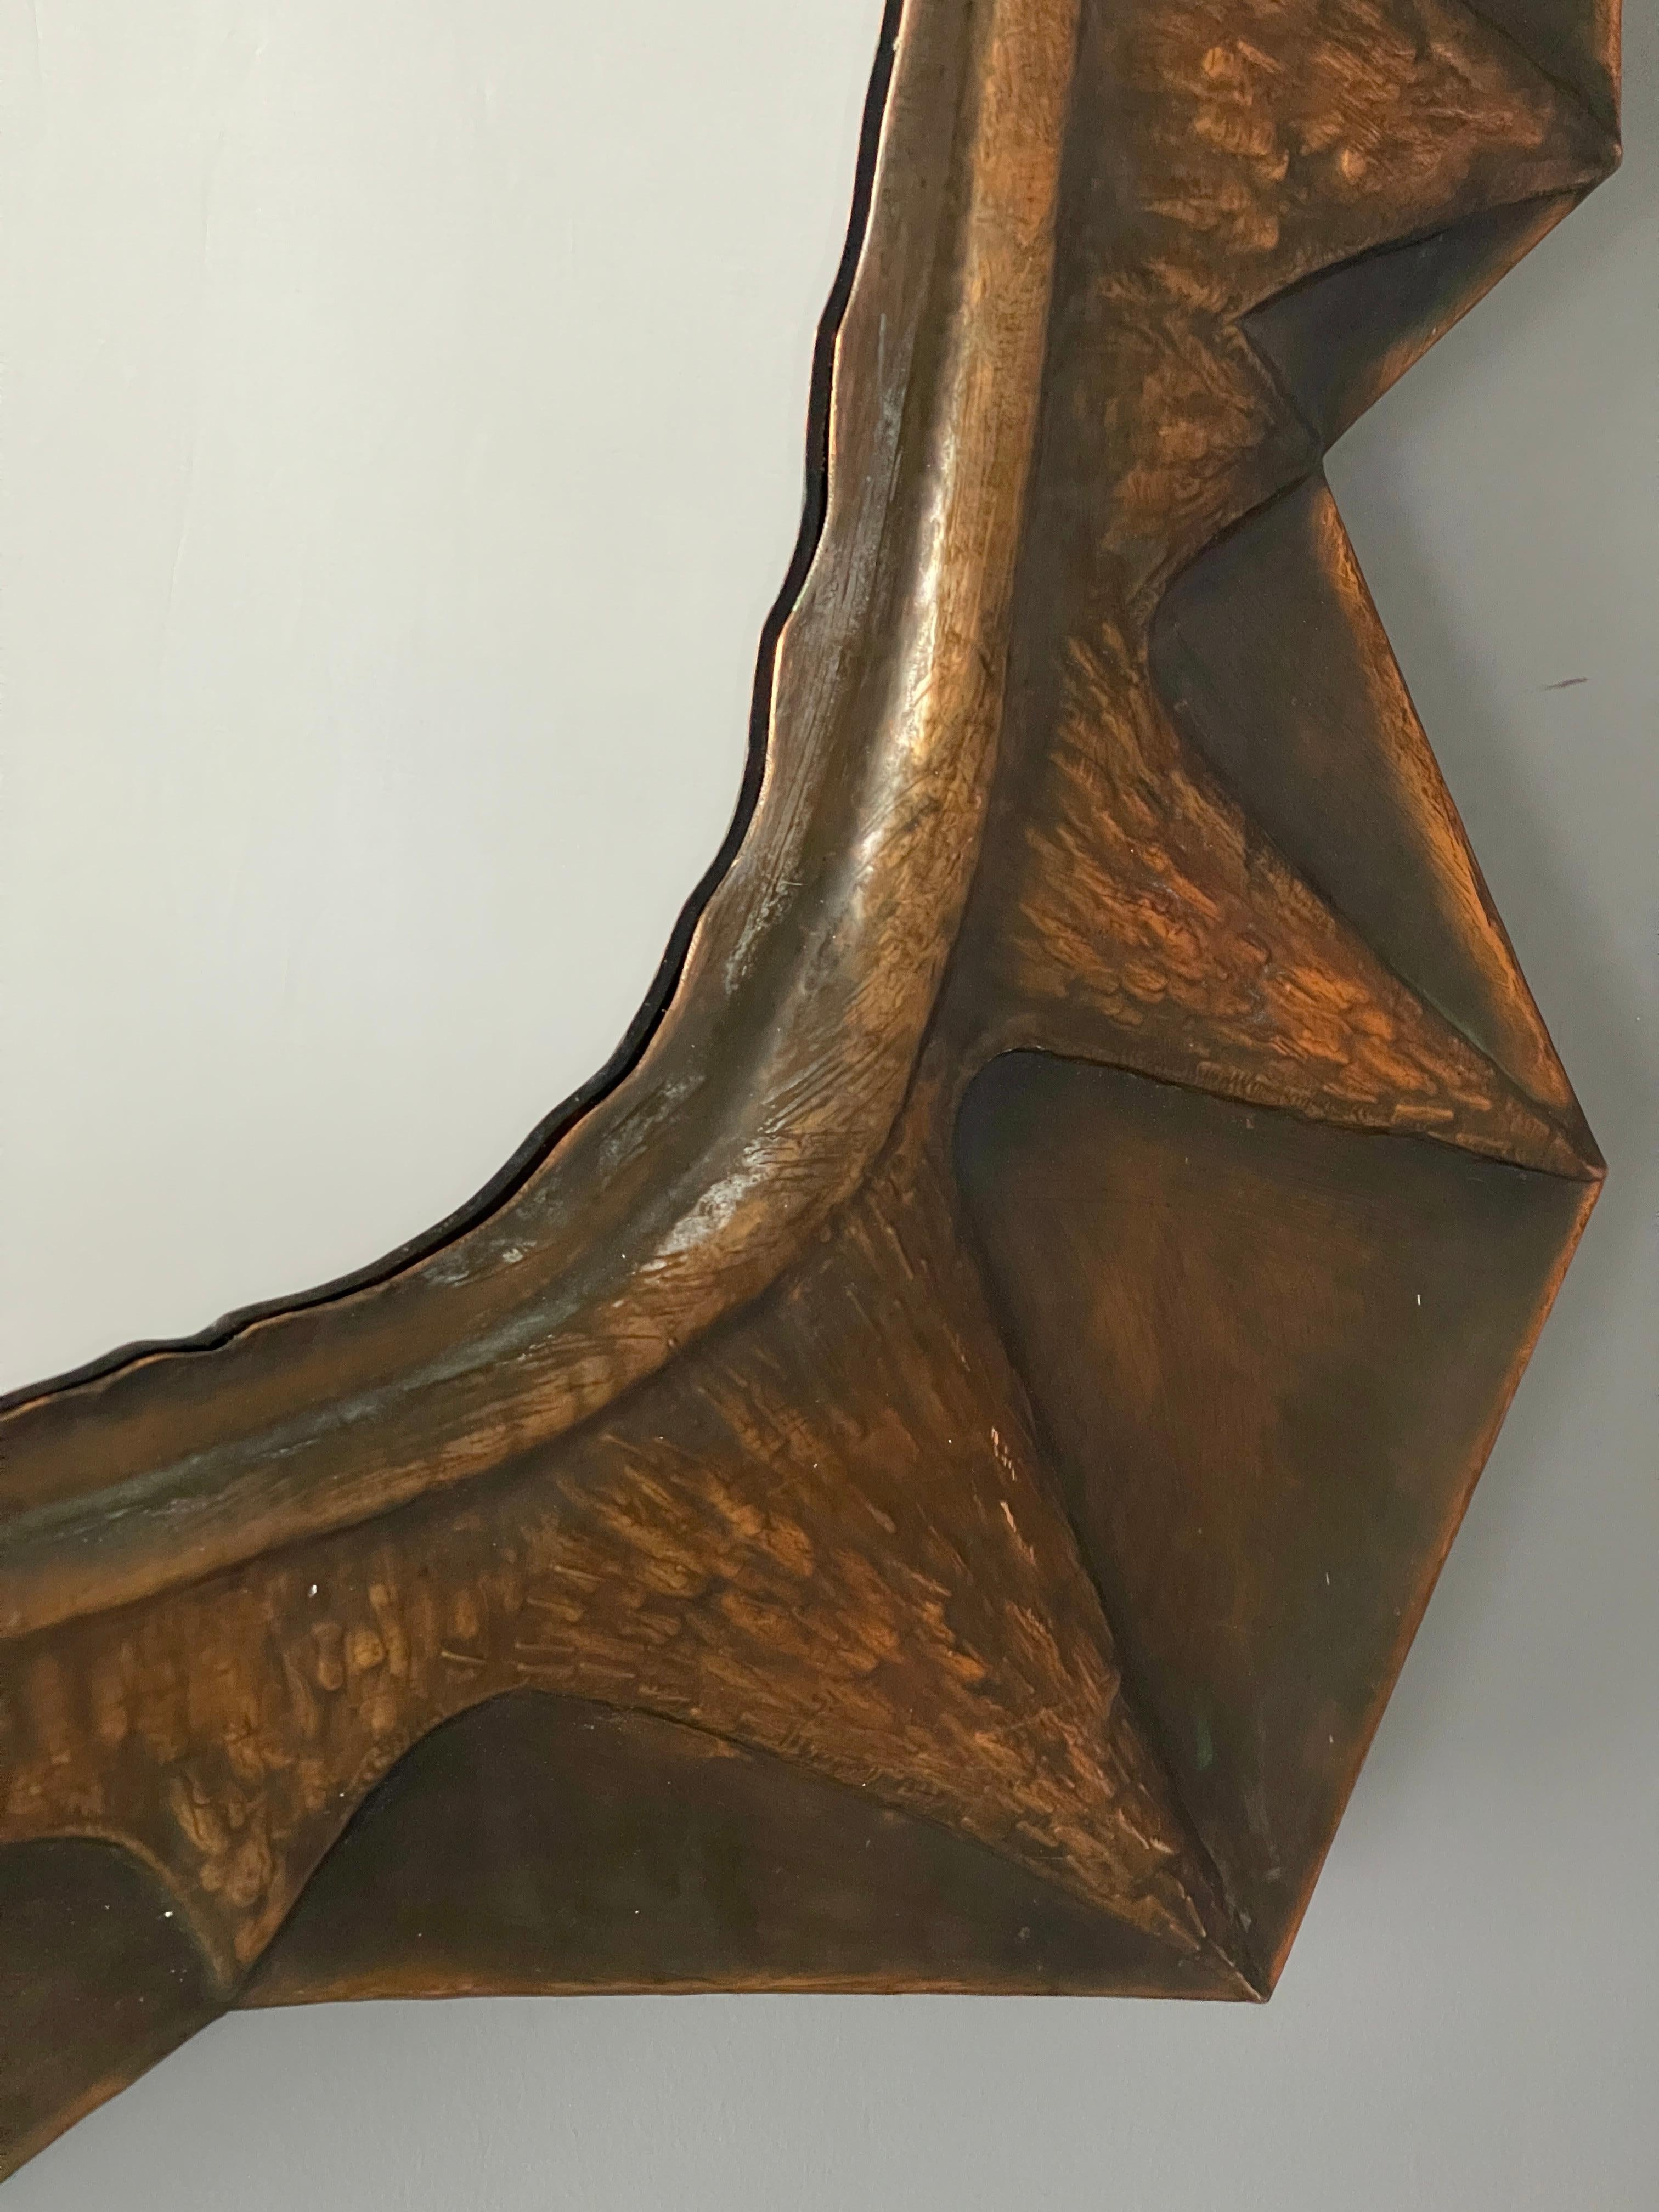 A sizable and sculptural freeform wall mirror, designed and produced in Italy, 1940s-1950s. Features a patinated copper mirror.

Other designers of the period include Gio Ponti, Fontana Arte, Line Vautrin, Francois-Xavier and Claude Lalanne, and